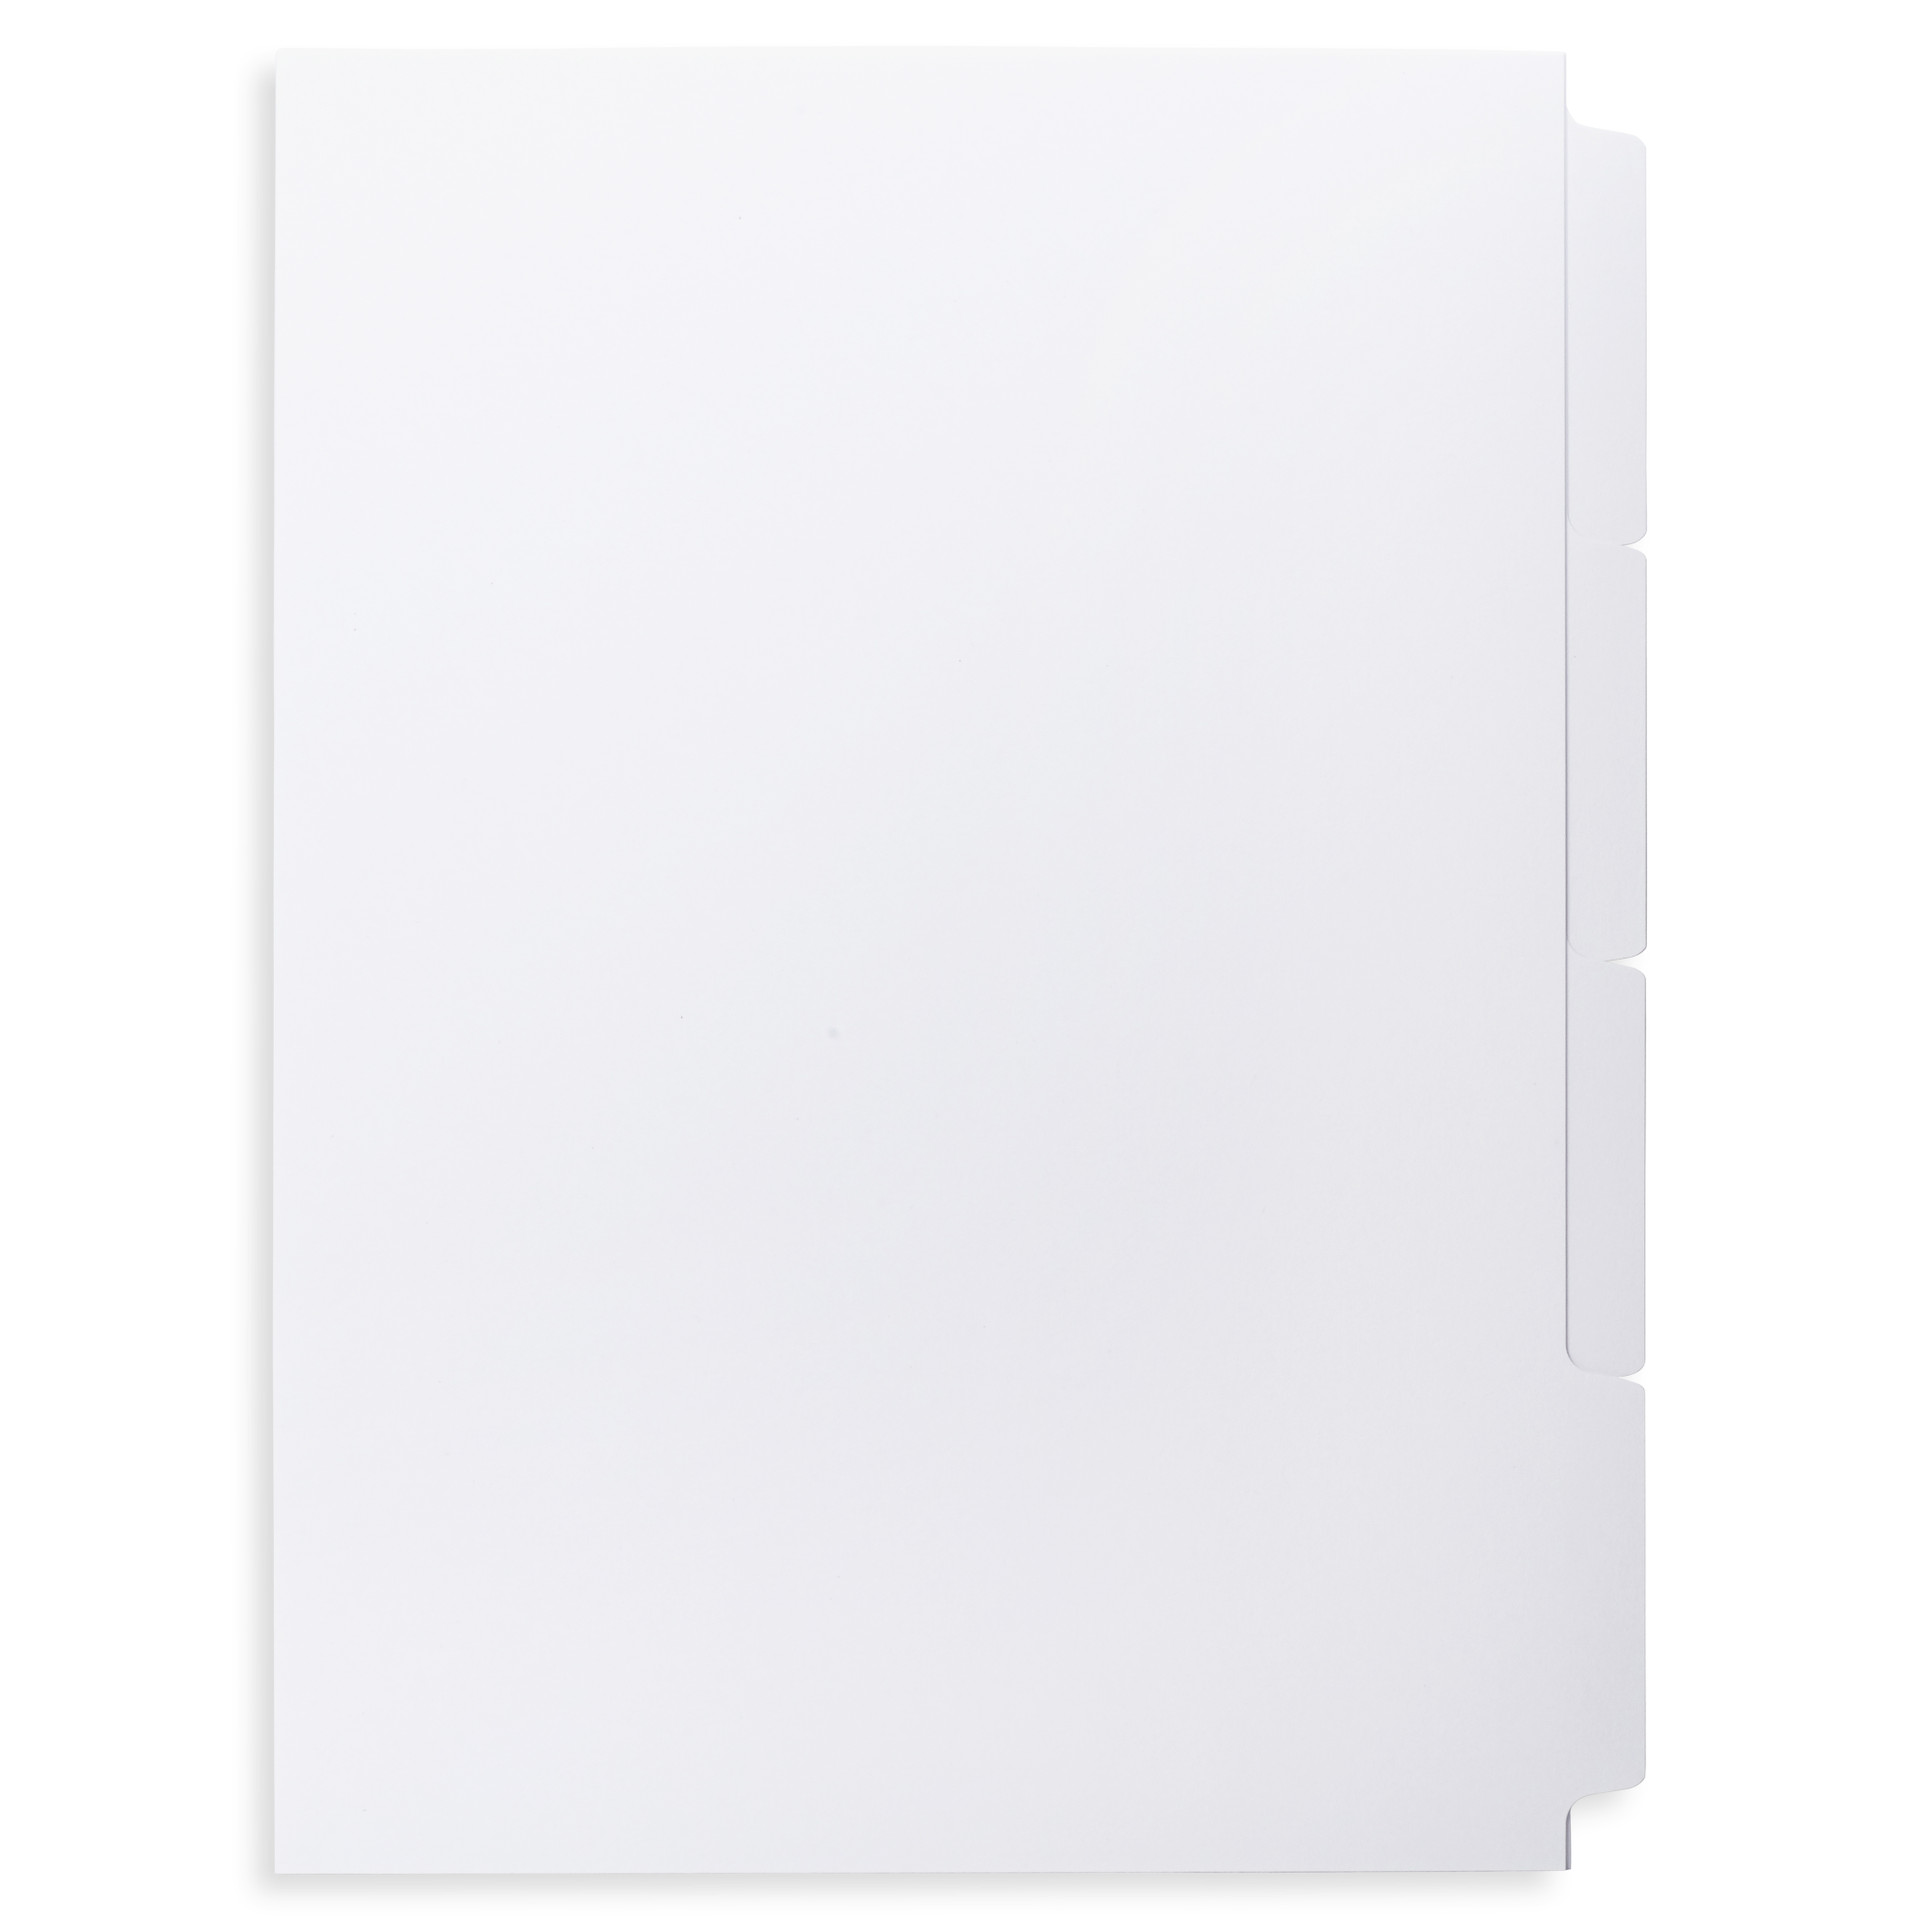 A4 4 Bank Uncoated Index Tab Dividers | Free Shipping On Orders Of $500